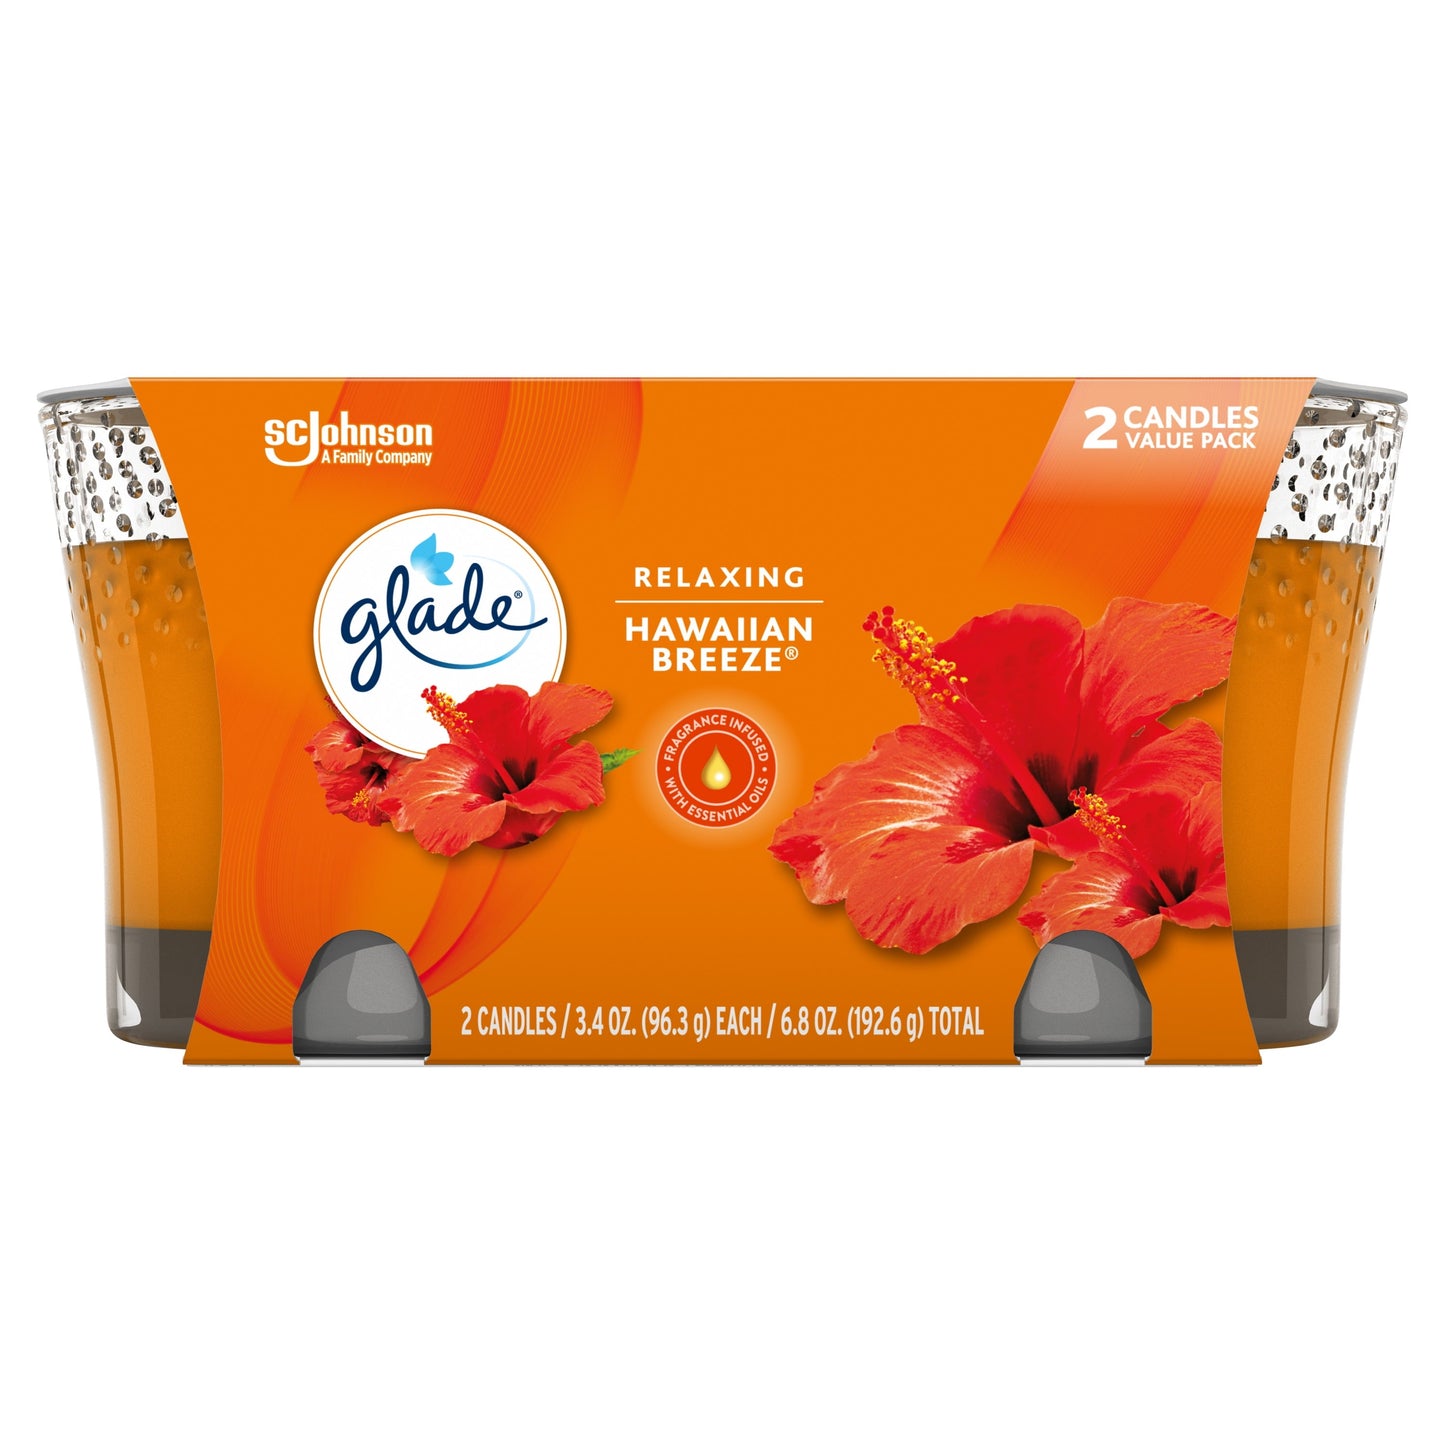 Glade Jar Candle 2 ct, Hawaiian Breeze, 6.8 oz. Total, Air Freshener, Wax Infused with Essential Oils